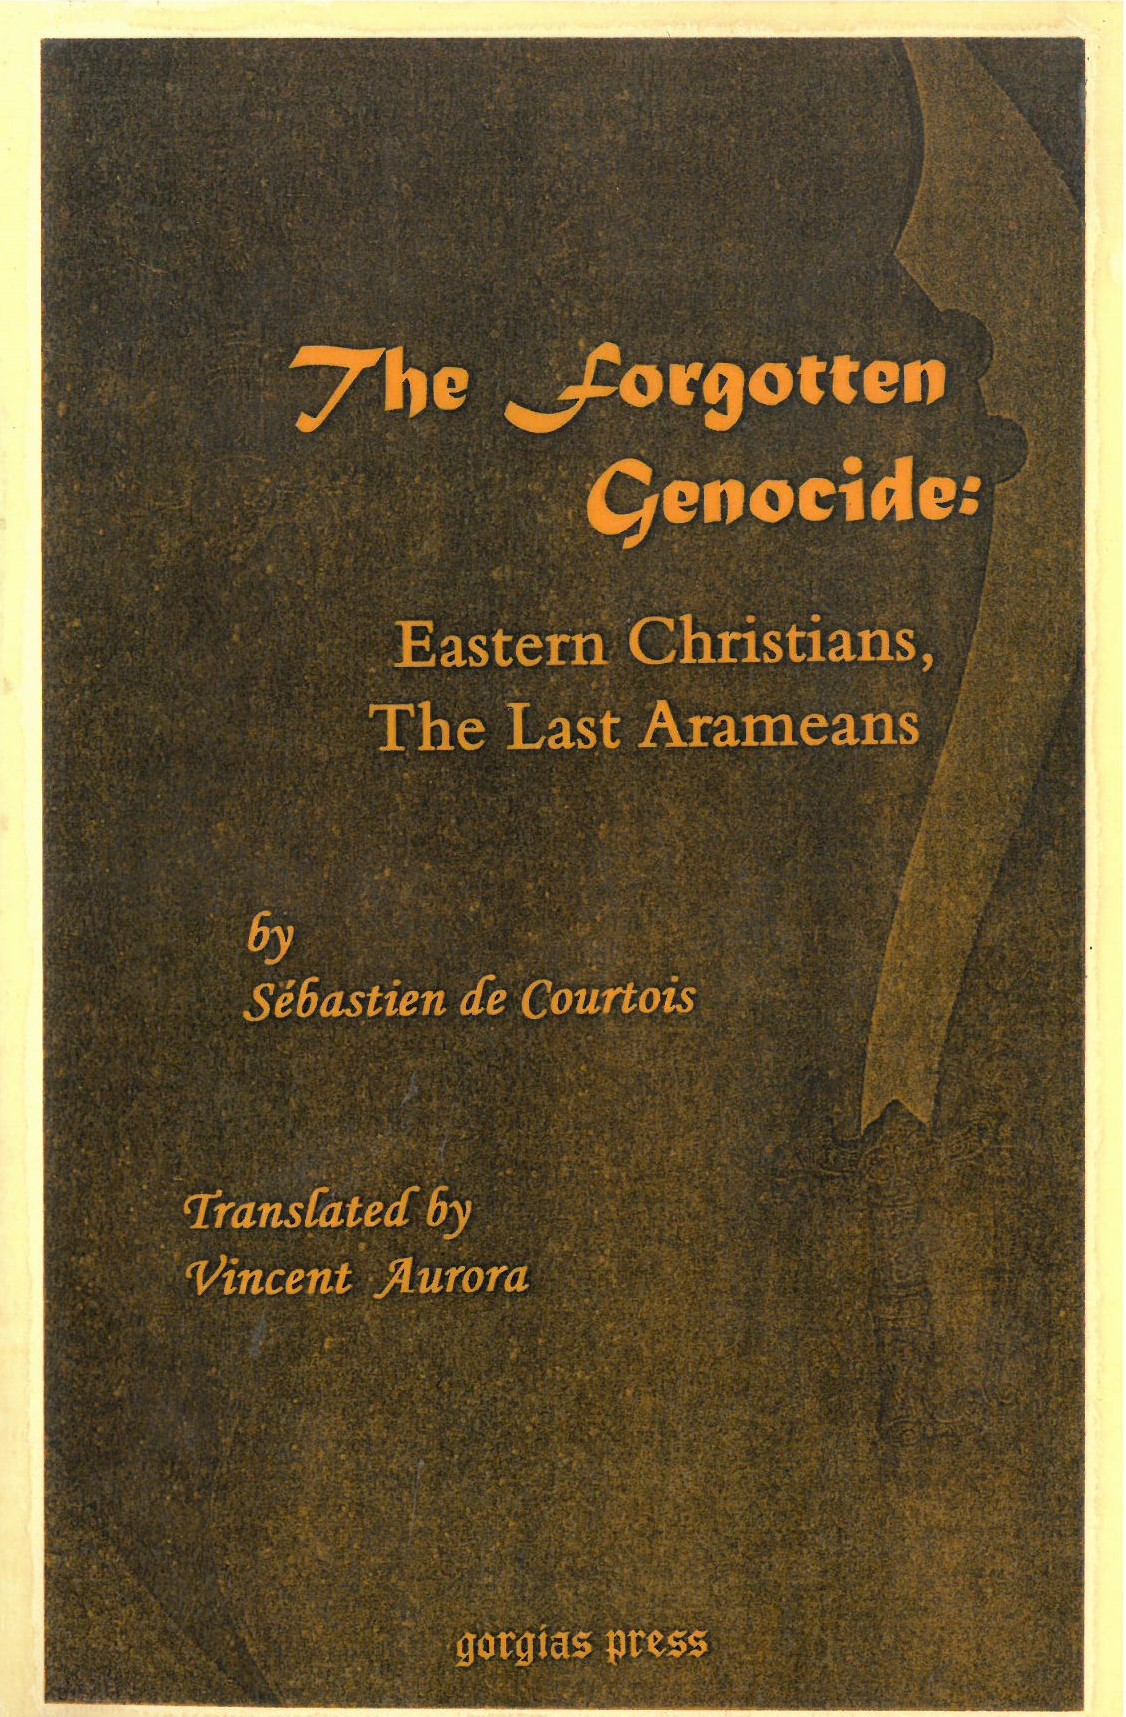 The Forgotten Genocide: Eastern Christians, The Last Arameans. - De Courtois, Sebastien.Translated from the French by Vincent Aurora